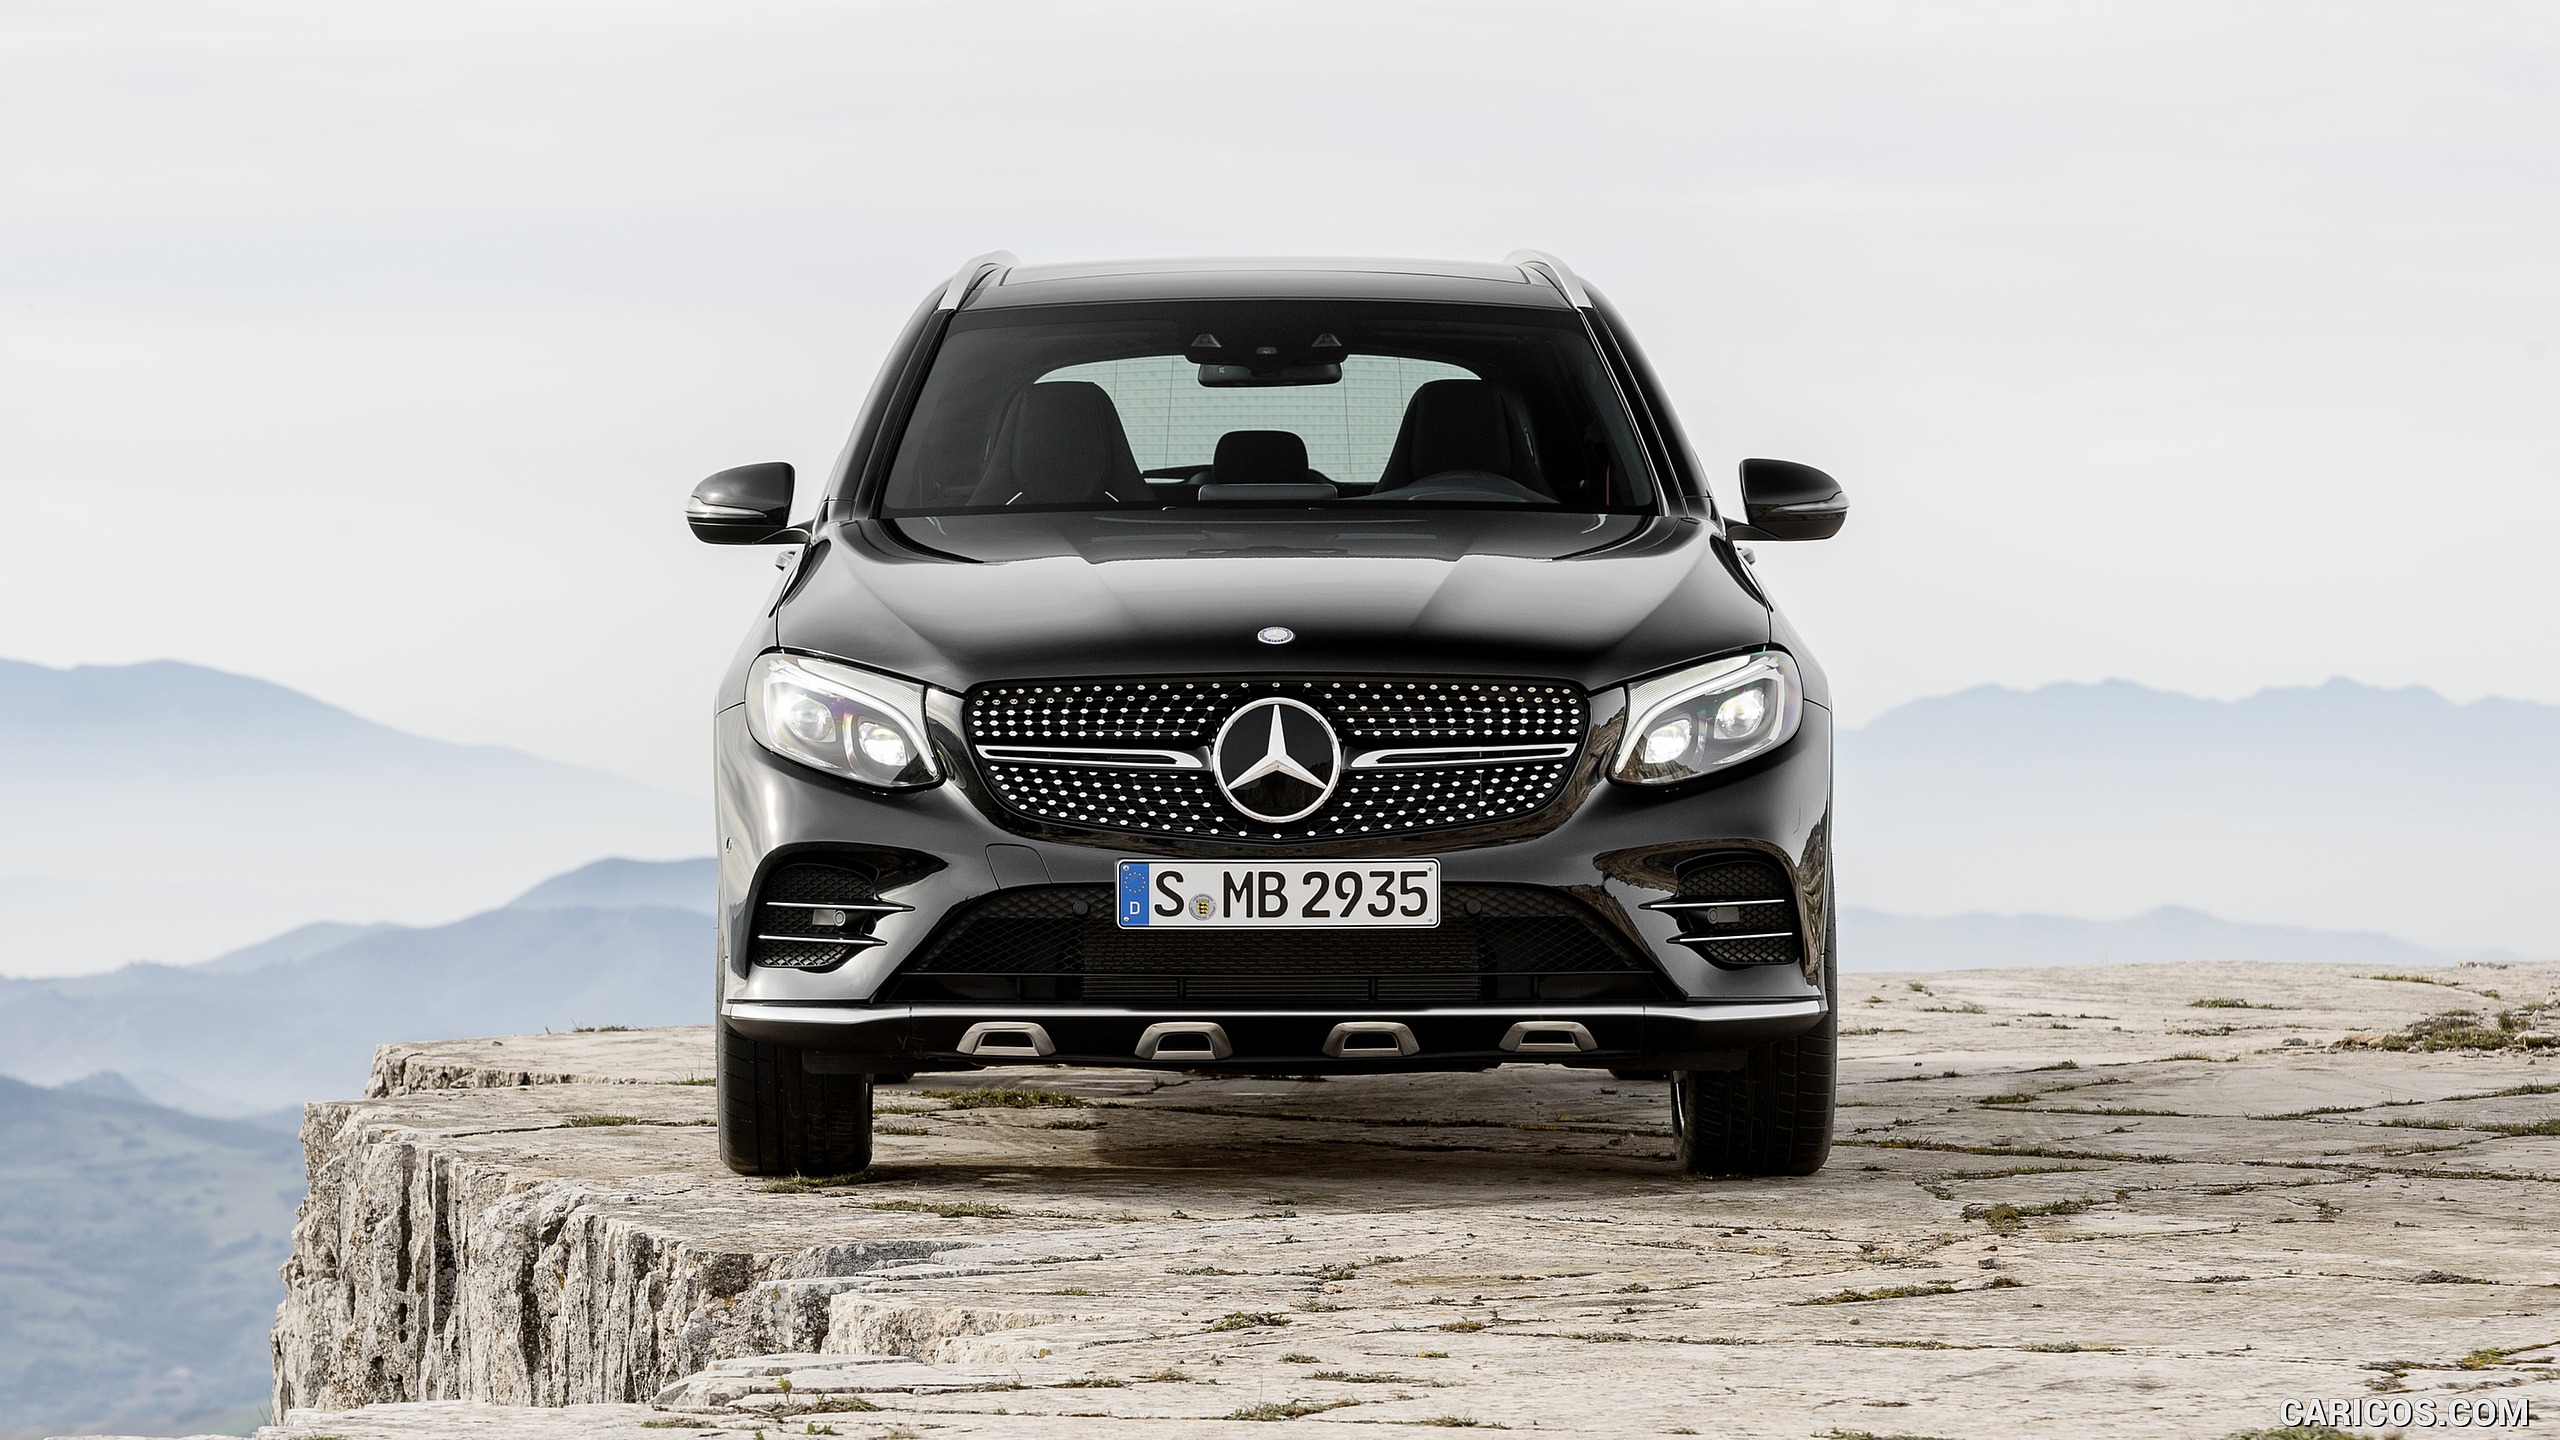 2017 Mercedes-AMG GLC 43 4MATIC (Chassis: X253, Color: Obsidian Black) - Front, #4 of 108